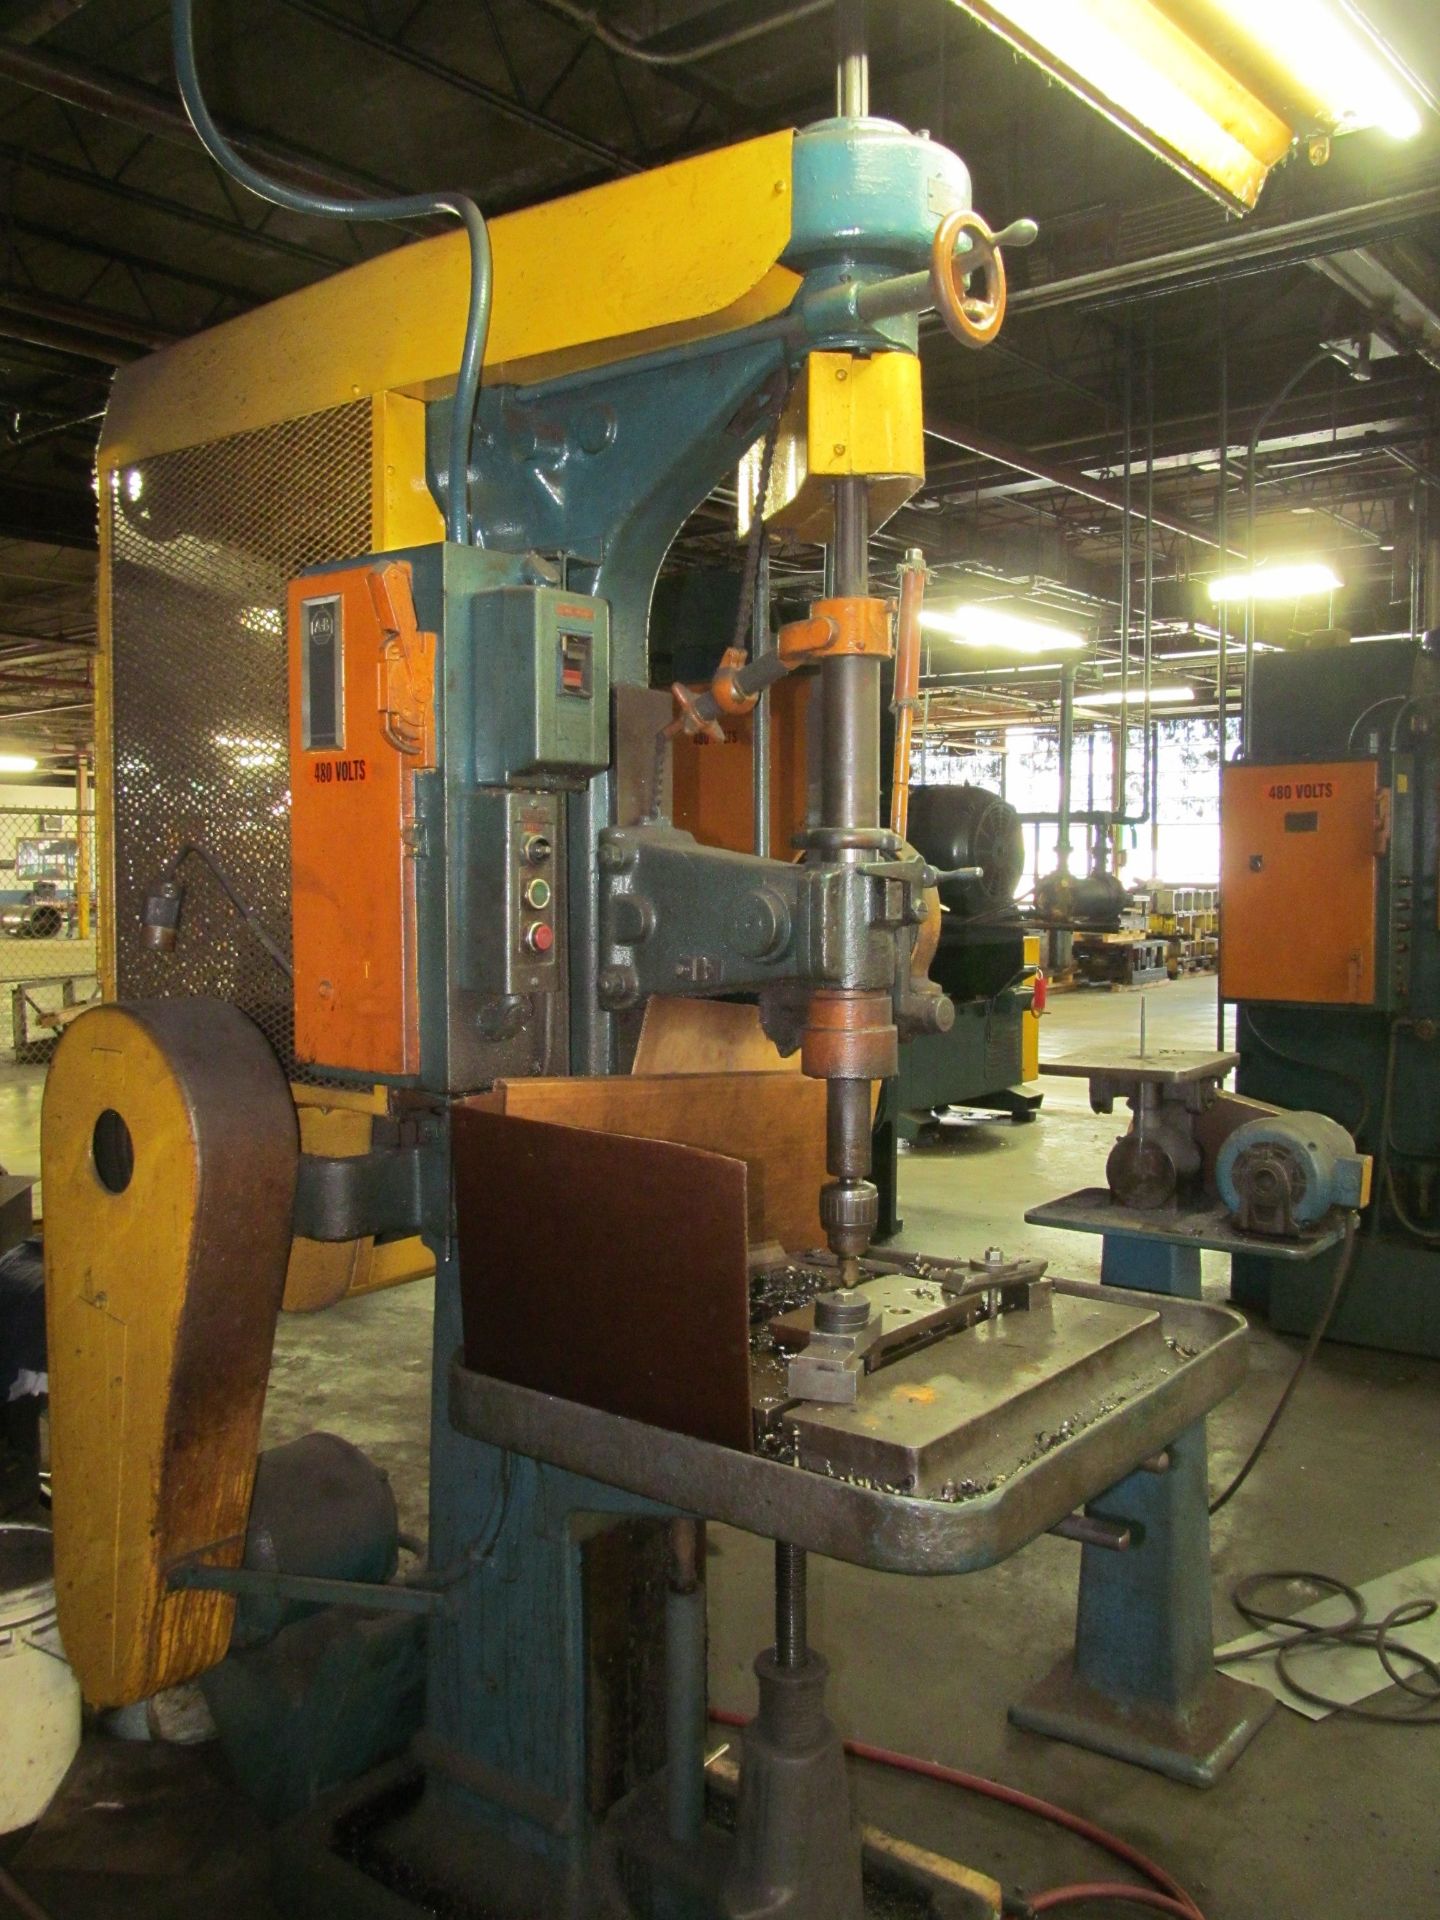 Avey 24 in. Single Spindle Vertical Boring Machine (Ref. #: 1847)